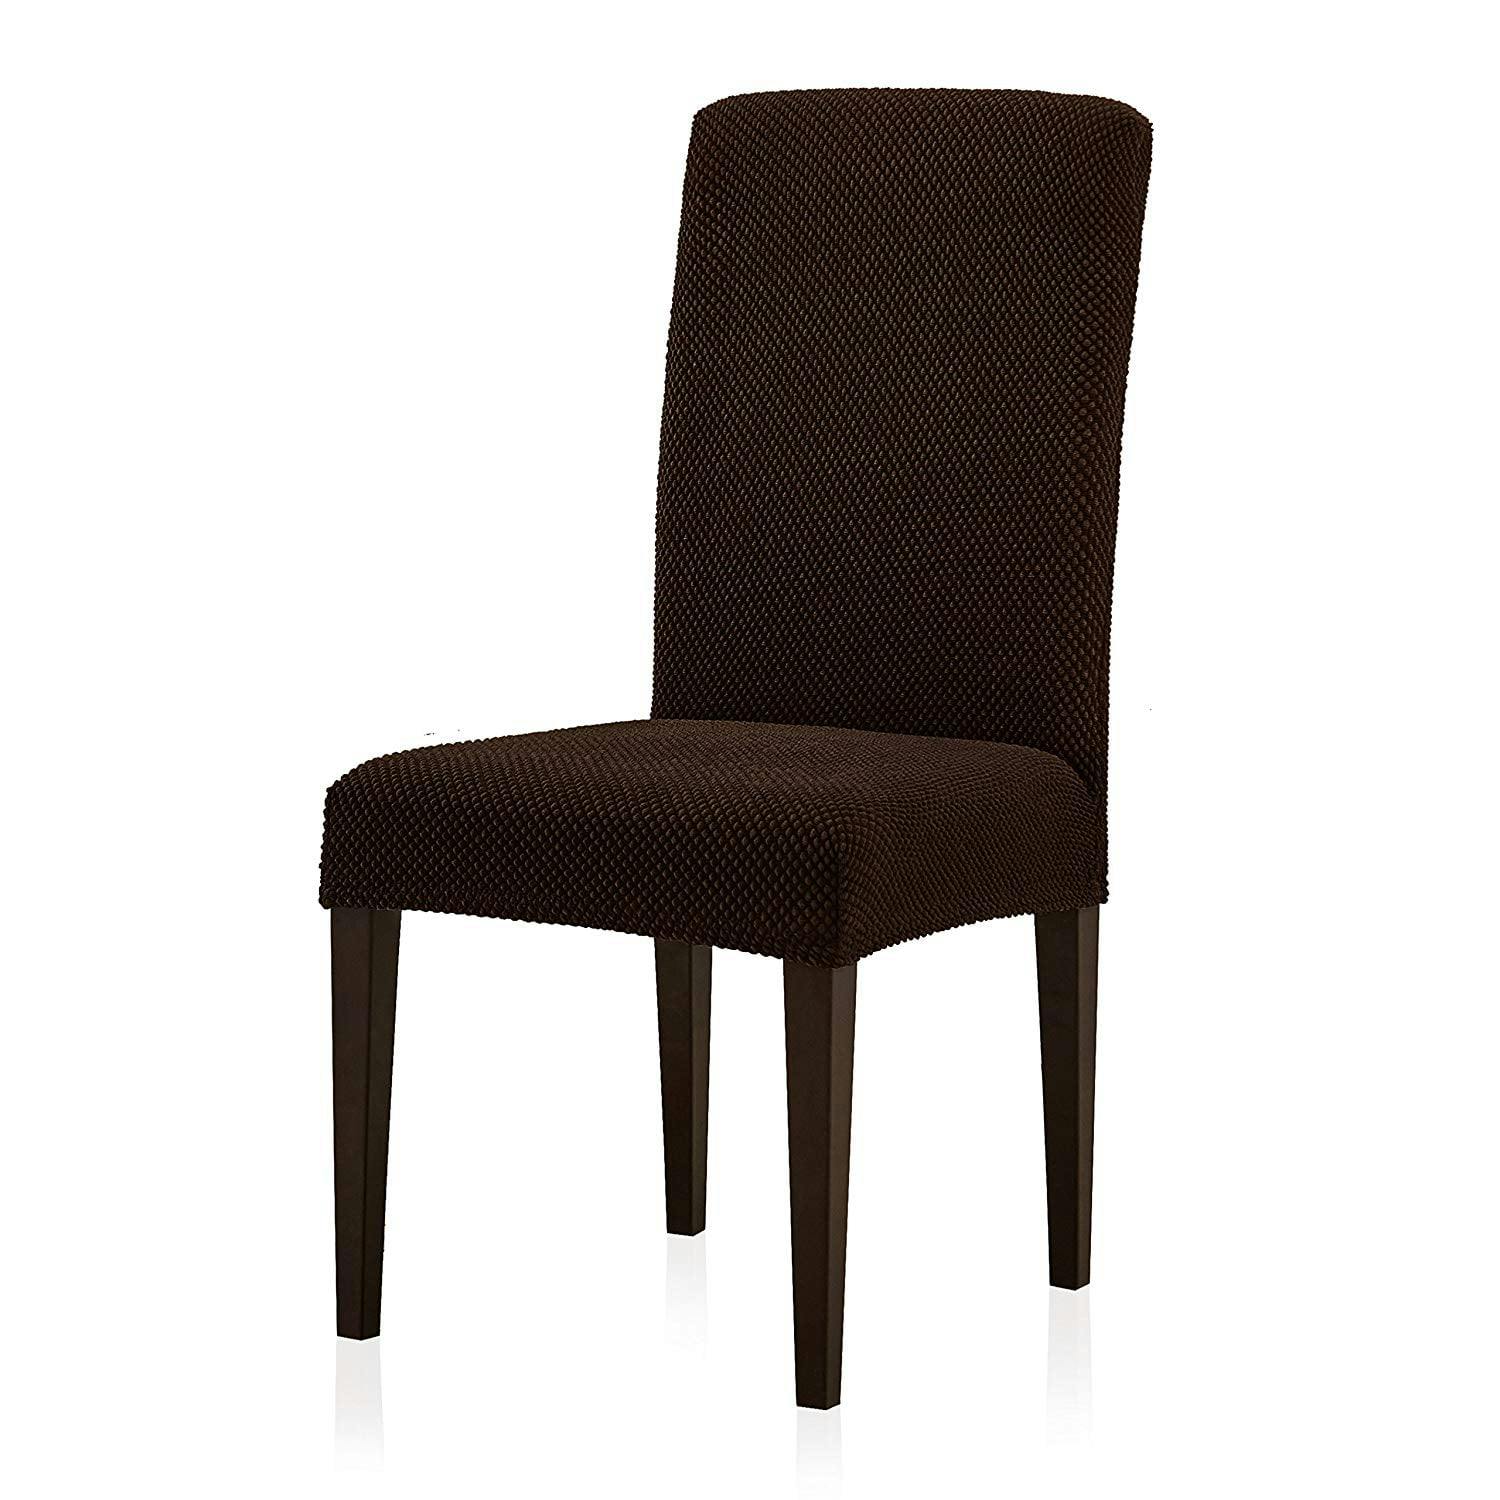 Contemporary Chocolate Stretch Dining Chair Slipcover Set of 4